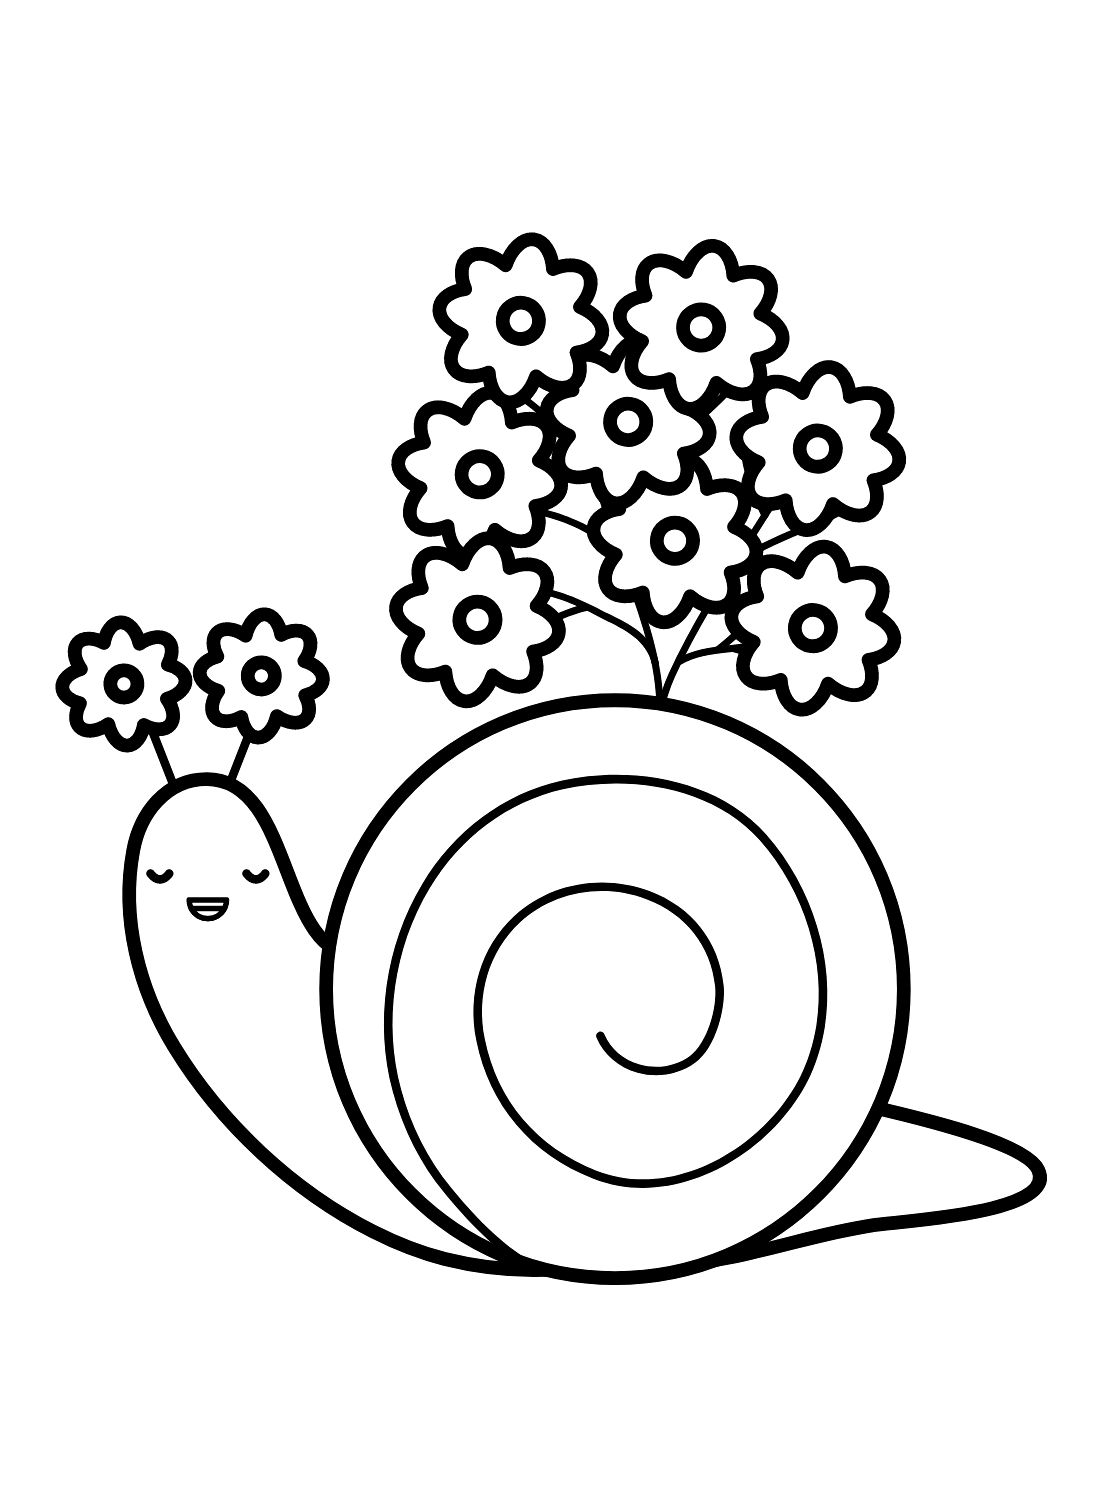 Cute Snail with Flowers from Snail